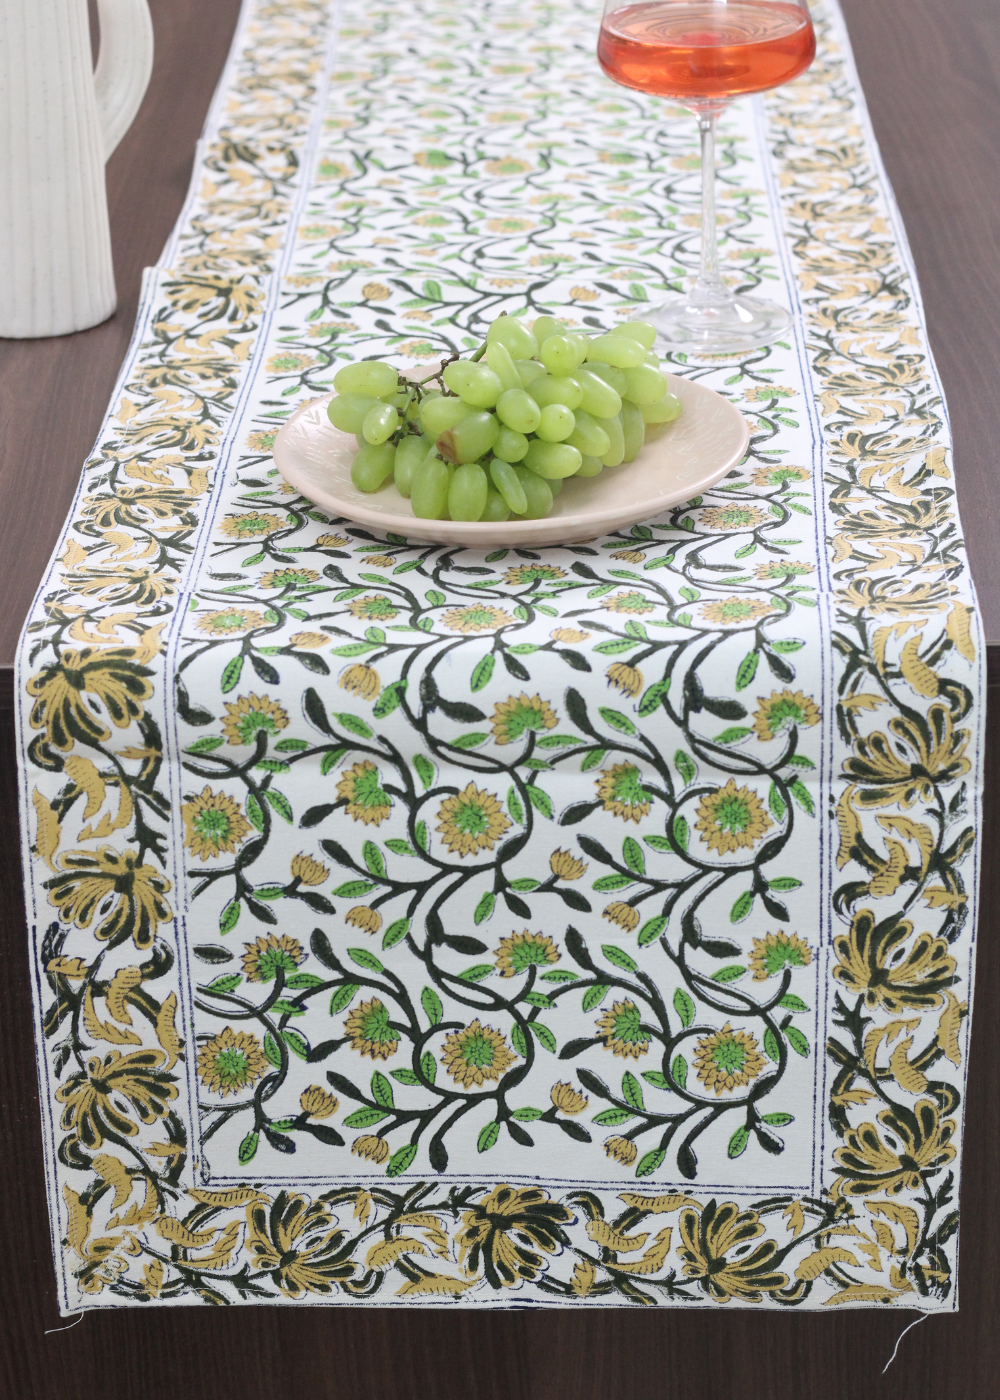 Green & yellow block print table runner with fruits